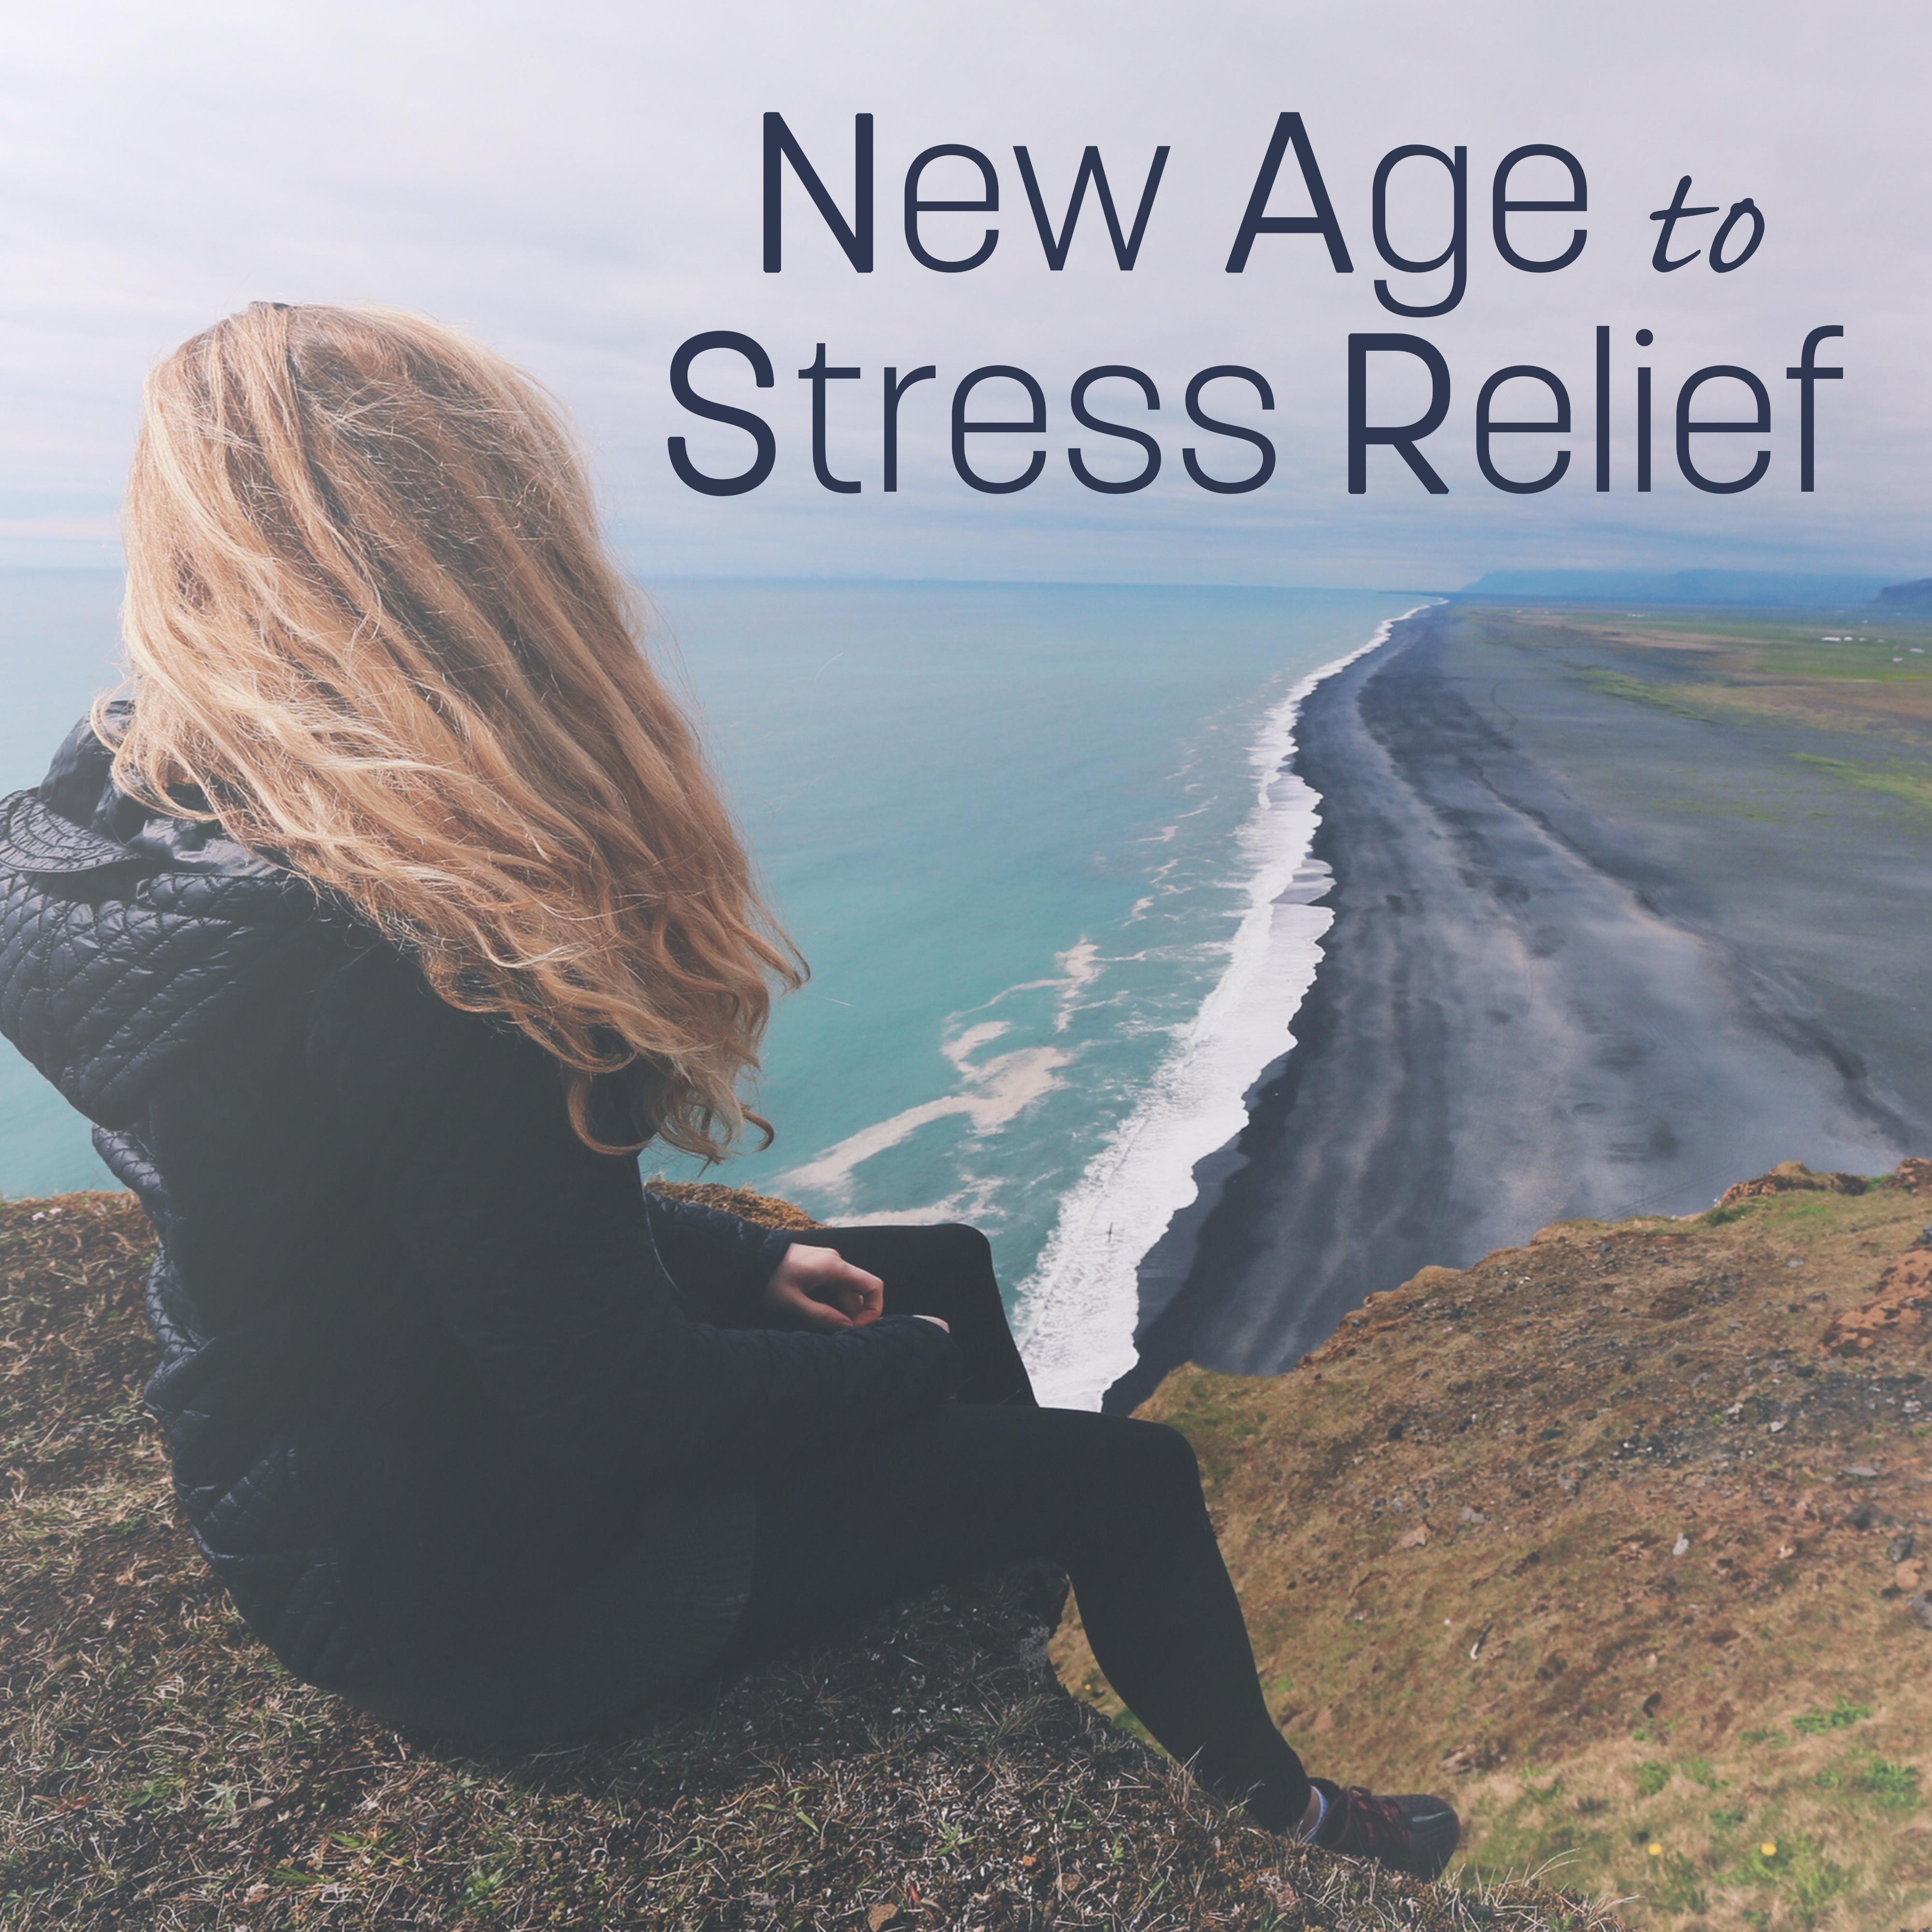 New Age to Stress Relief  Relaxing New Age Music, Sounds to Calm Down, Healing Therapy, Spa Massage